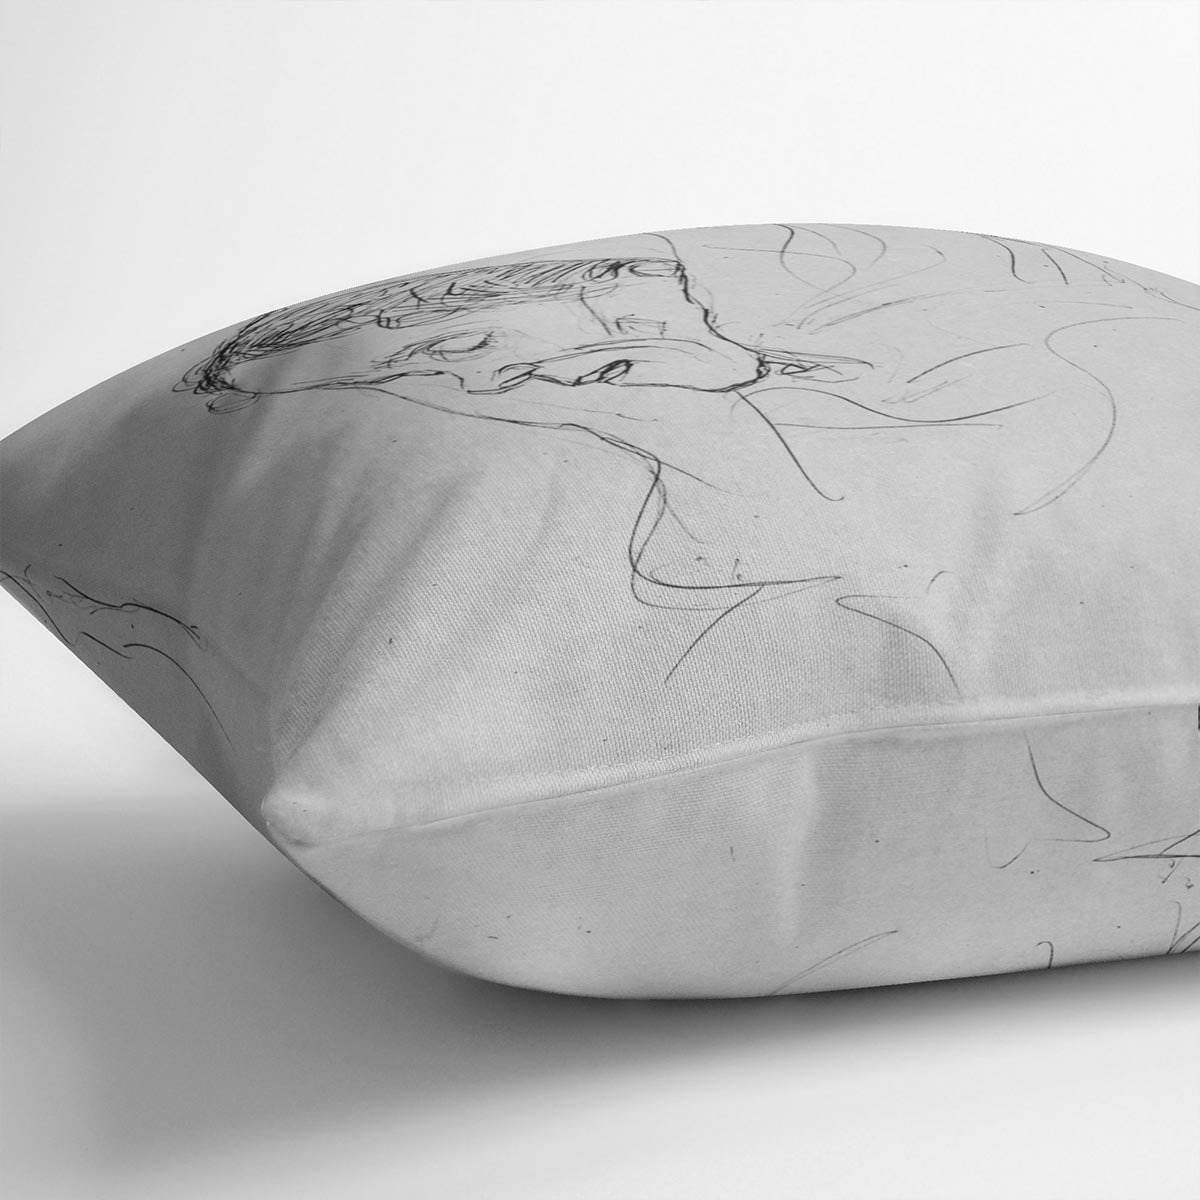 Head of an old woman in profile by Klimt Cushion